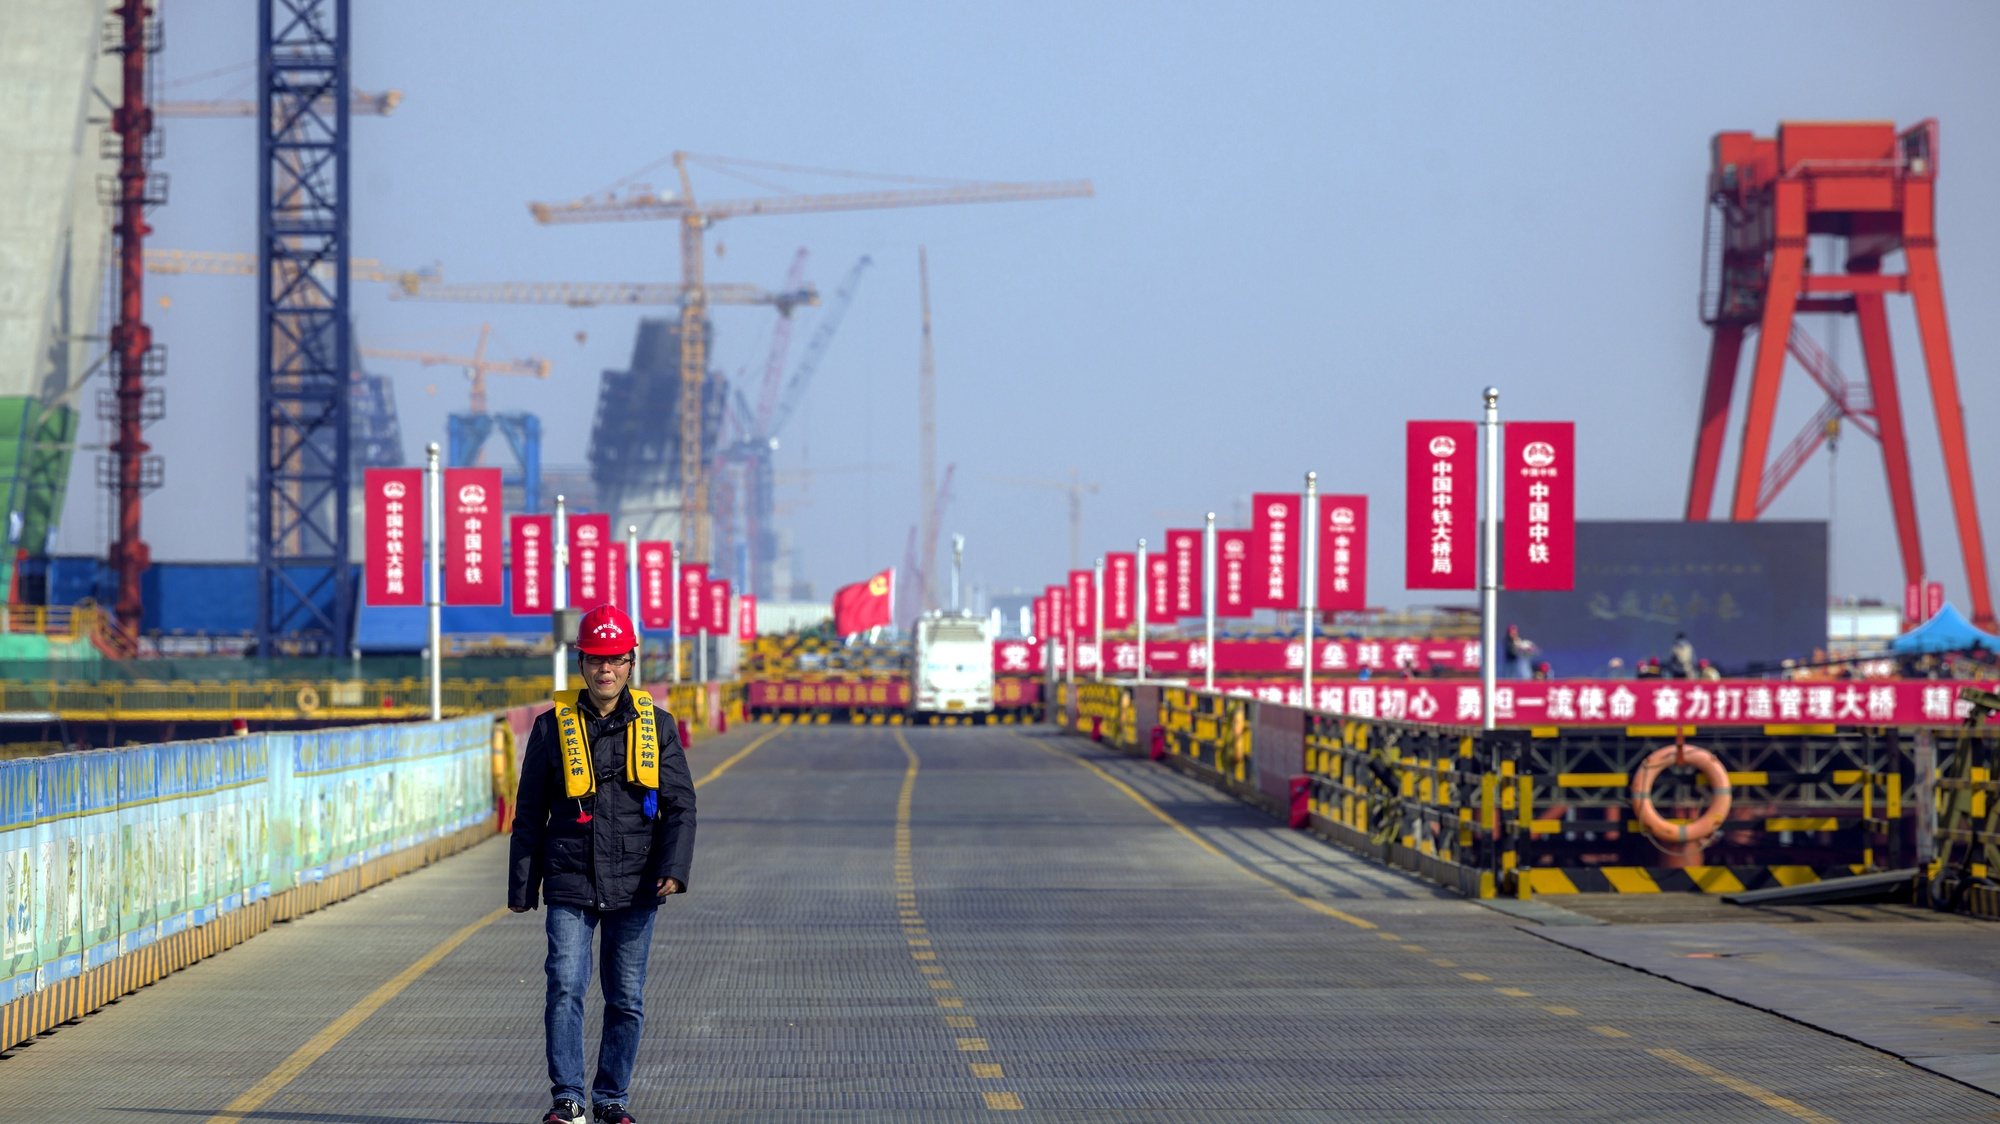 epa09629075 A man walks on a Changzhou-Taizhou Yangtze River Bridge pylon construction site, during the organised media tour in Changzhou, Jiangsu province, China, 08 December 2021. The Changzhou-Taizhou Yangtze River Bridge connects the two cities across the river. It is a three-in-one cross-river passage that integrates expressways, intercity railways, and first-class highways. Construction started in January 2019 and is expected to be completed in 2024. The main channel bridge adopts a double-layer 1176-meter cable-stayed bridge, and the dedicated channel bridge has a steel arch bridge with a main span of 388 meters.  EPA/ALEX PLAVEVSKI